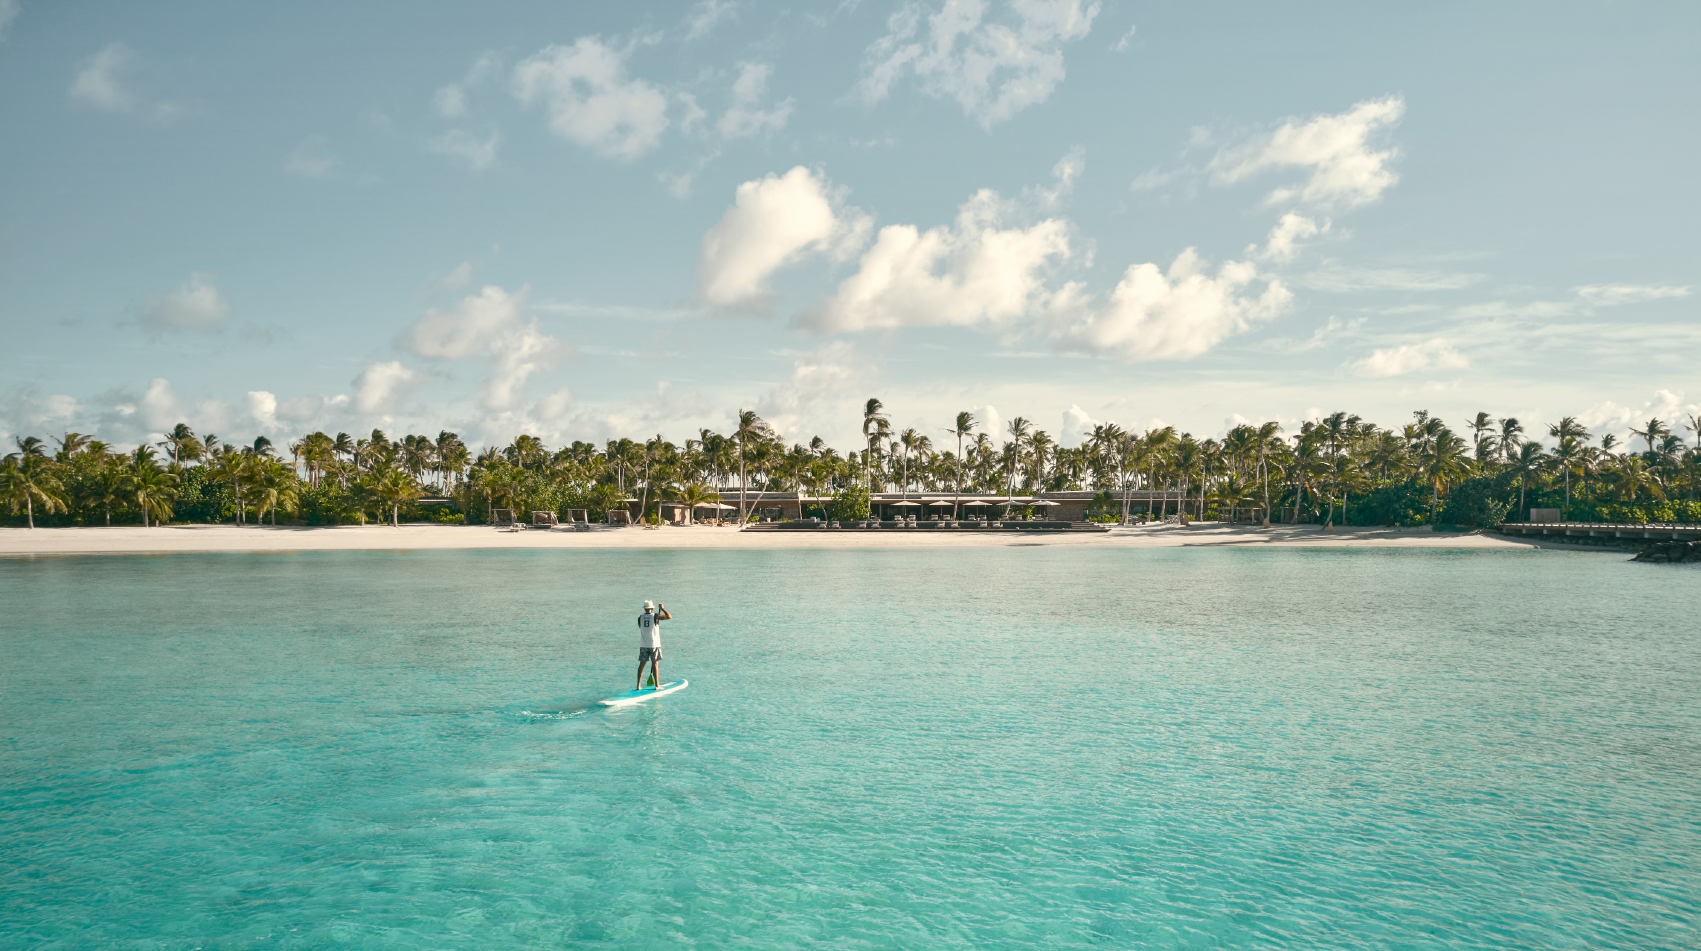 Paddle boarding in the Maldives with Patina Maldives